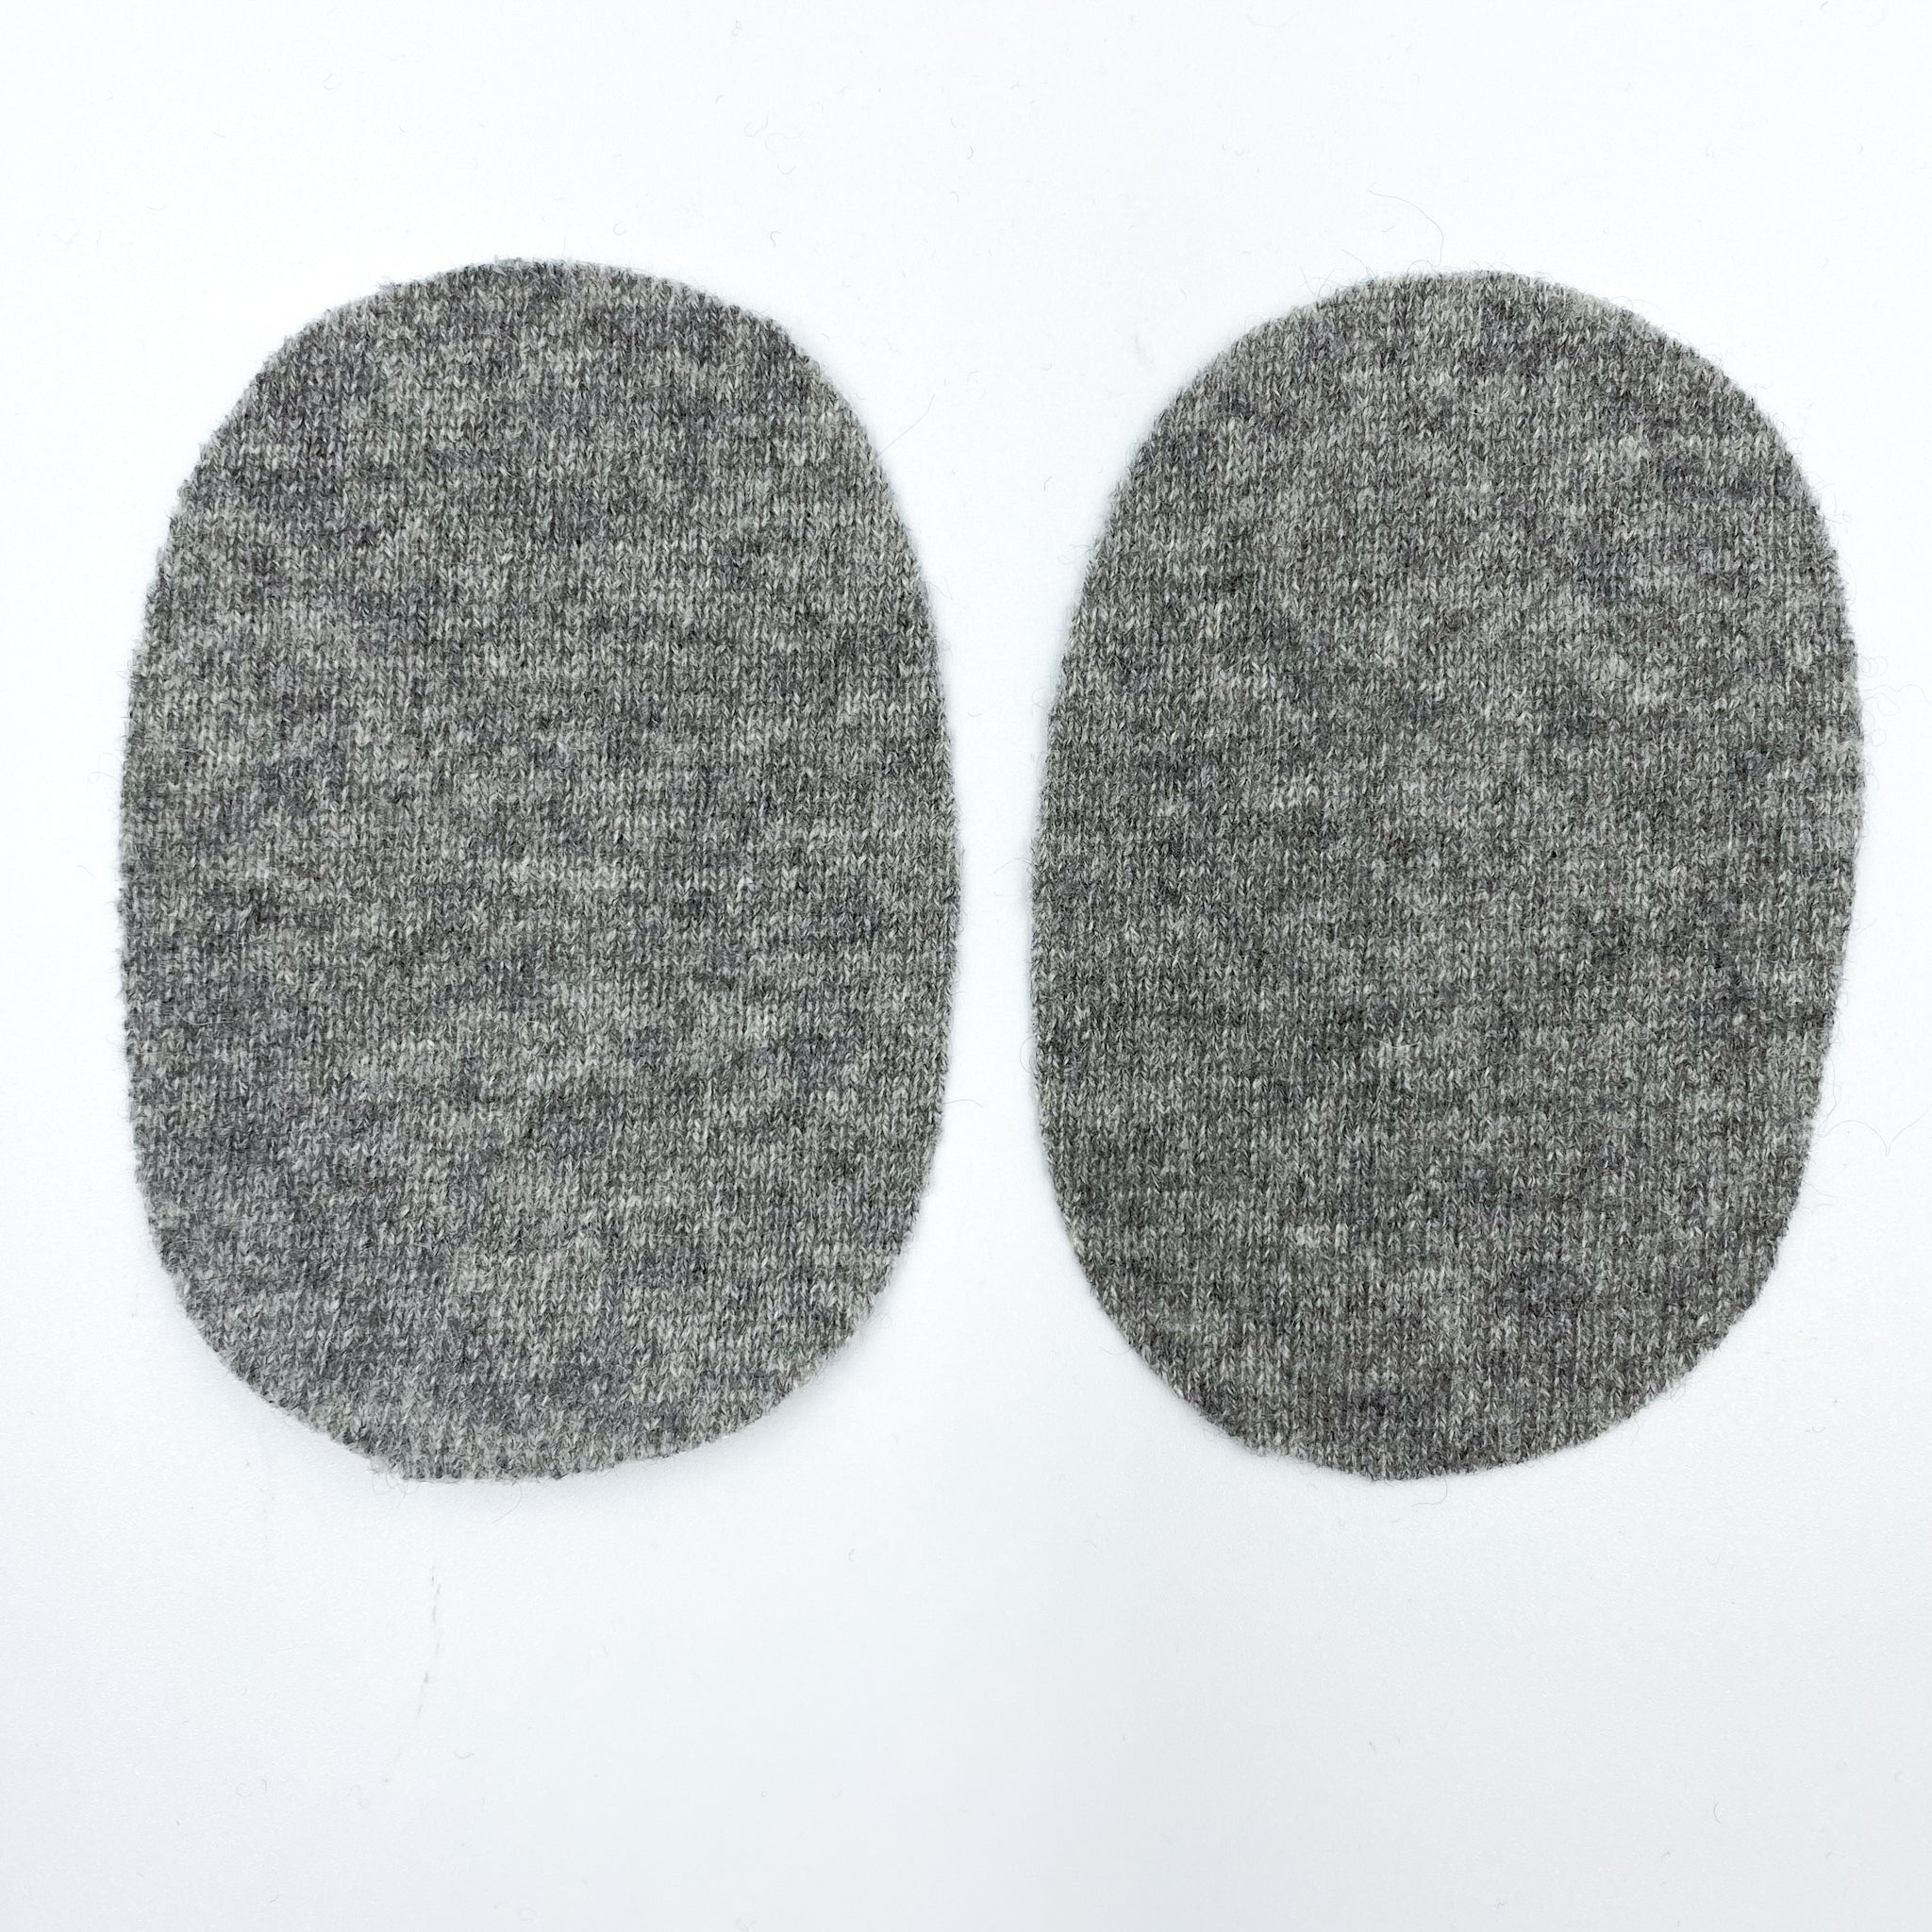 Large Pale Grey Elbow Patches - Machine Use